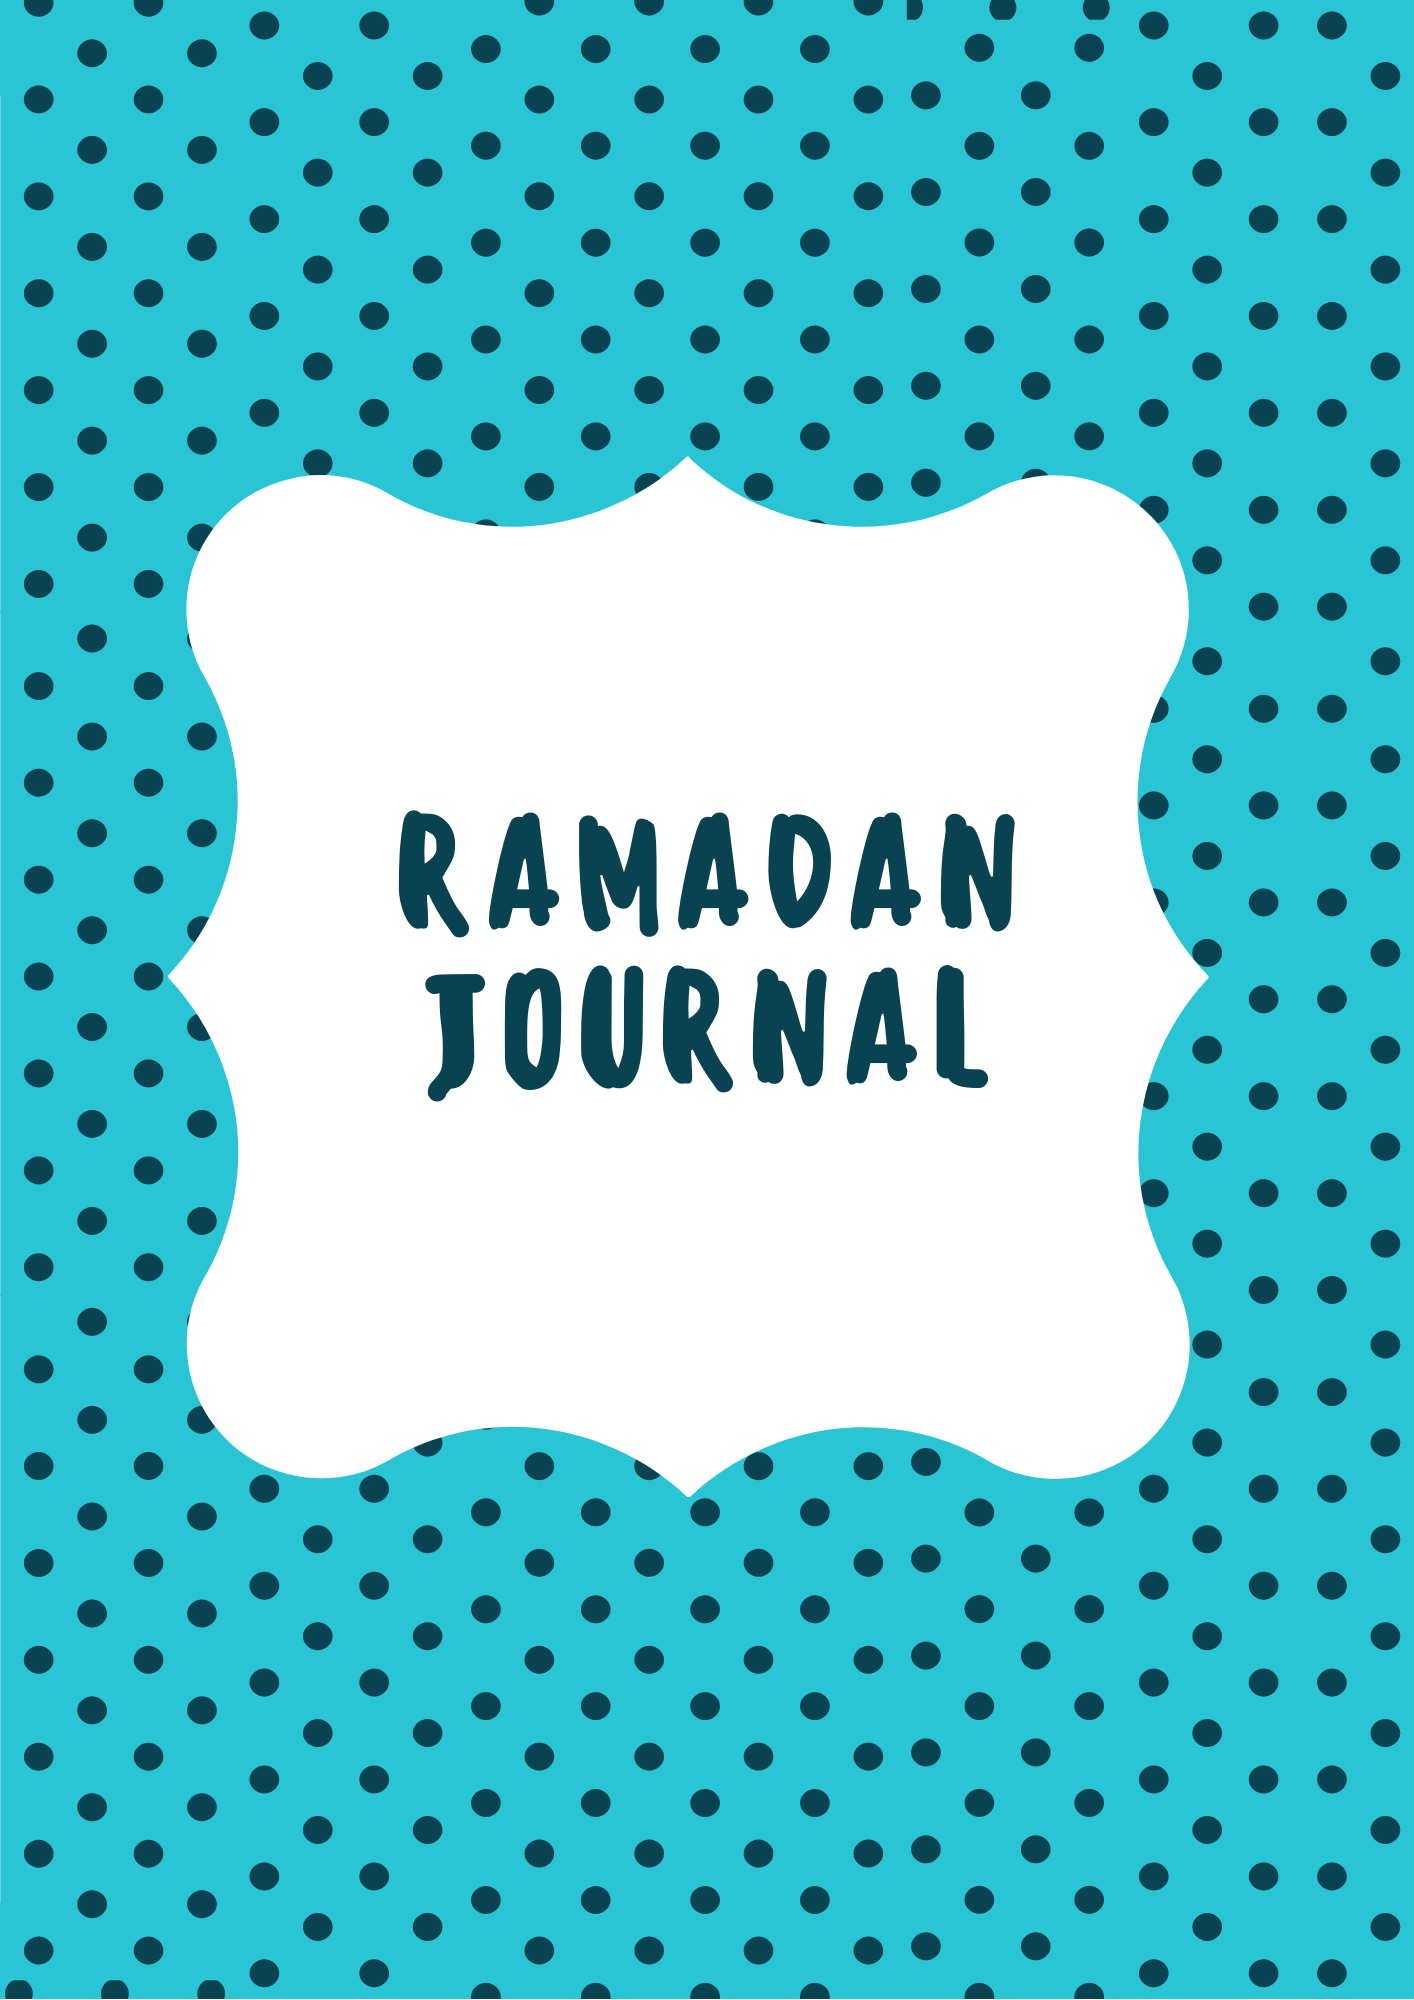 read more about the article ramadan journal pdf for kids and adults